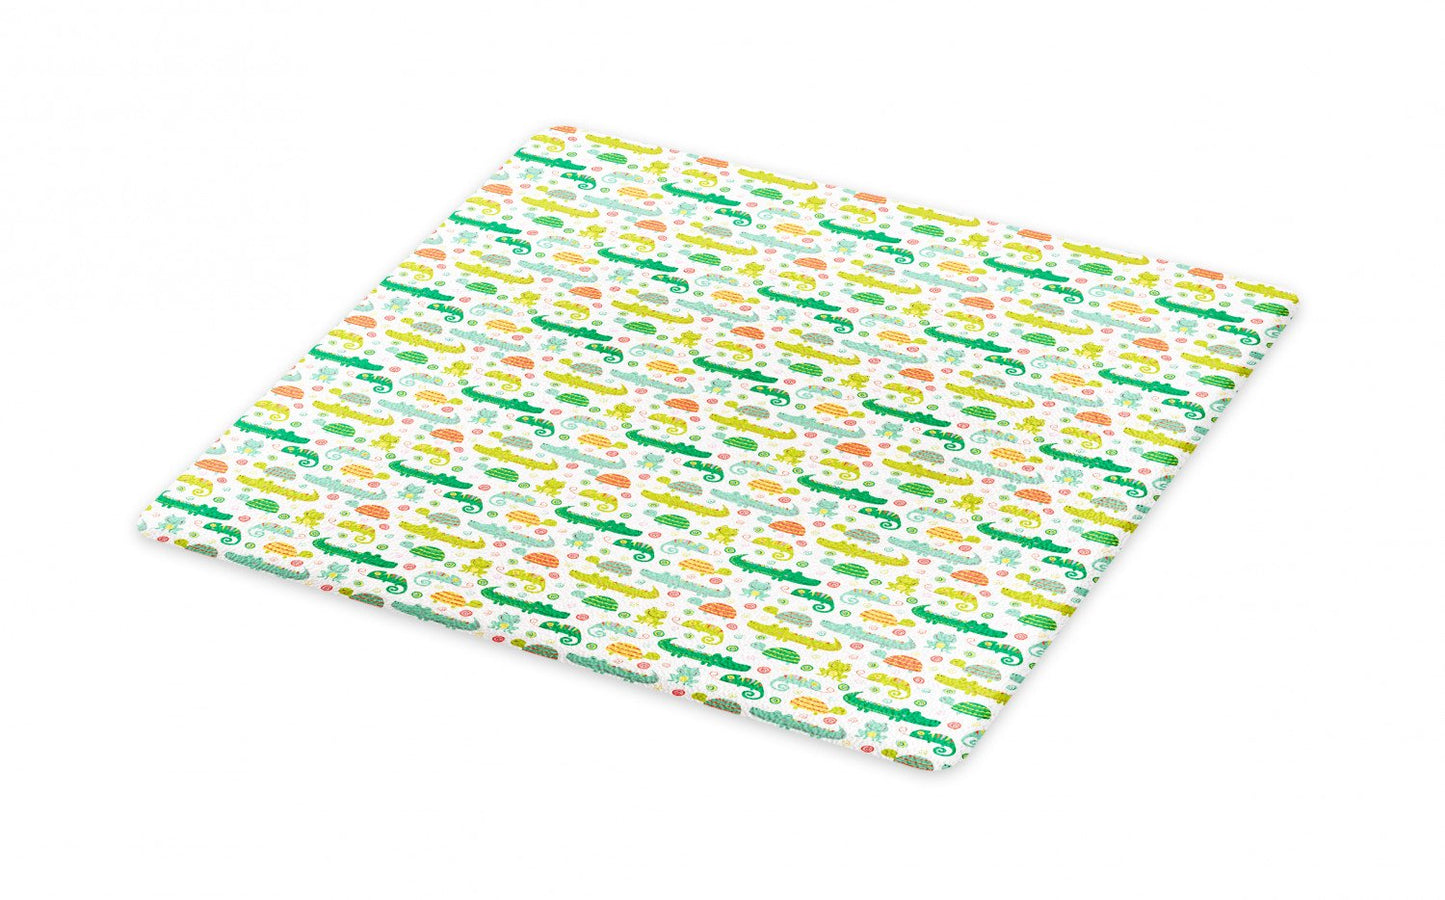 Cartoon Cutting Board, Nursery Themed Reptile and Amphibian Animals Pattern Frog Gator Turtle, Decorative Tempered Glass Cutting and Serving Board, in 3 Sizes, by Ambesonne Animals & Pet Supplies > Pet Supplies > Reptile & Amphibian Supplies > Reptile & Amphibian Food Kozmos S  